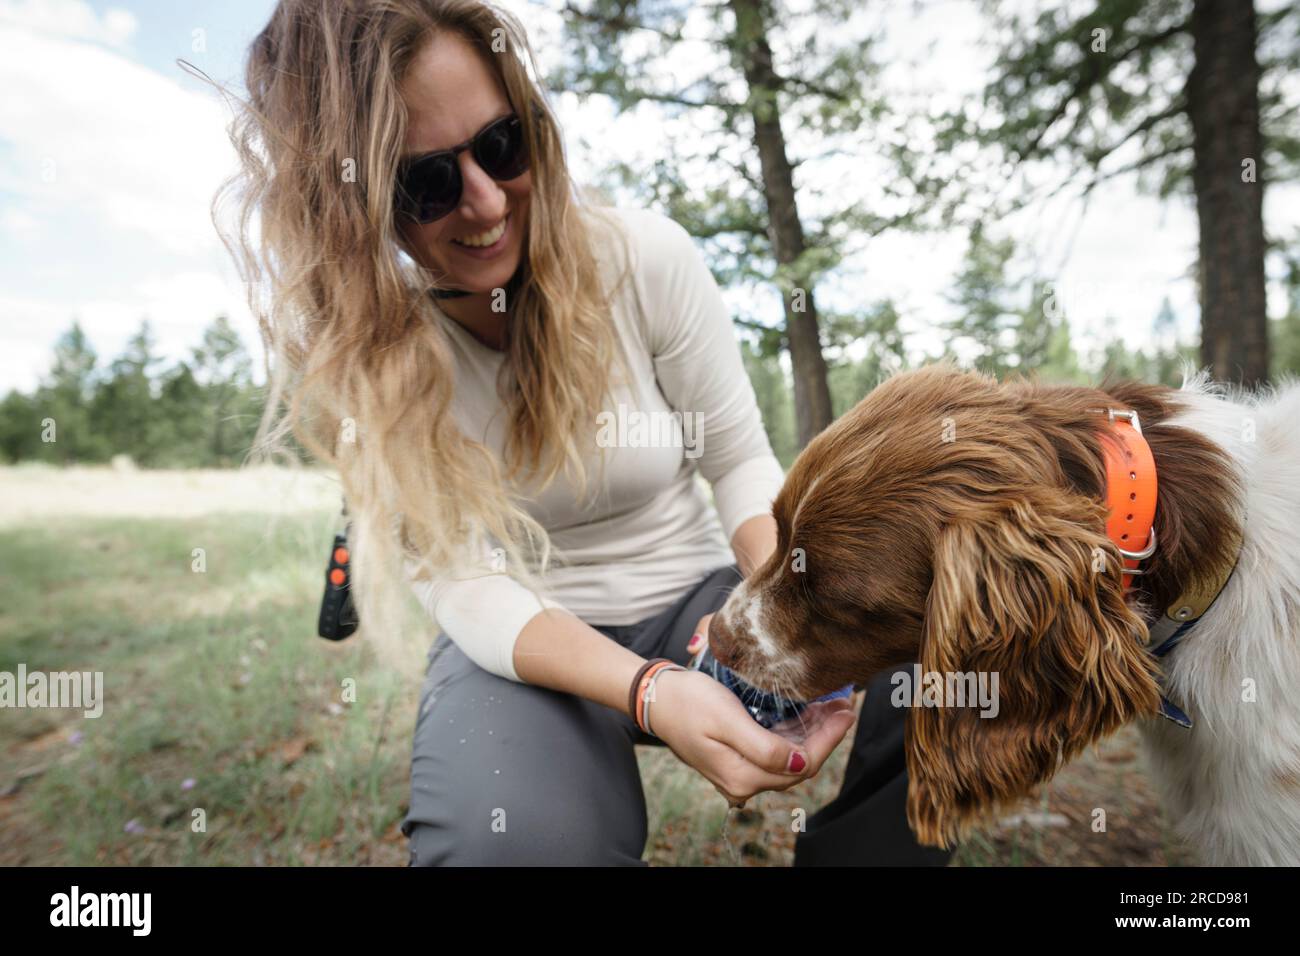 Closeup of young women smiling feeding dog water from hand, BC, Canada Stock Photo